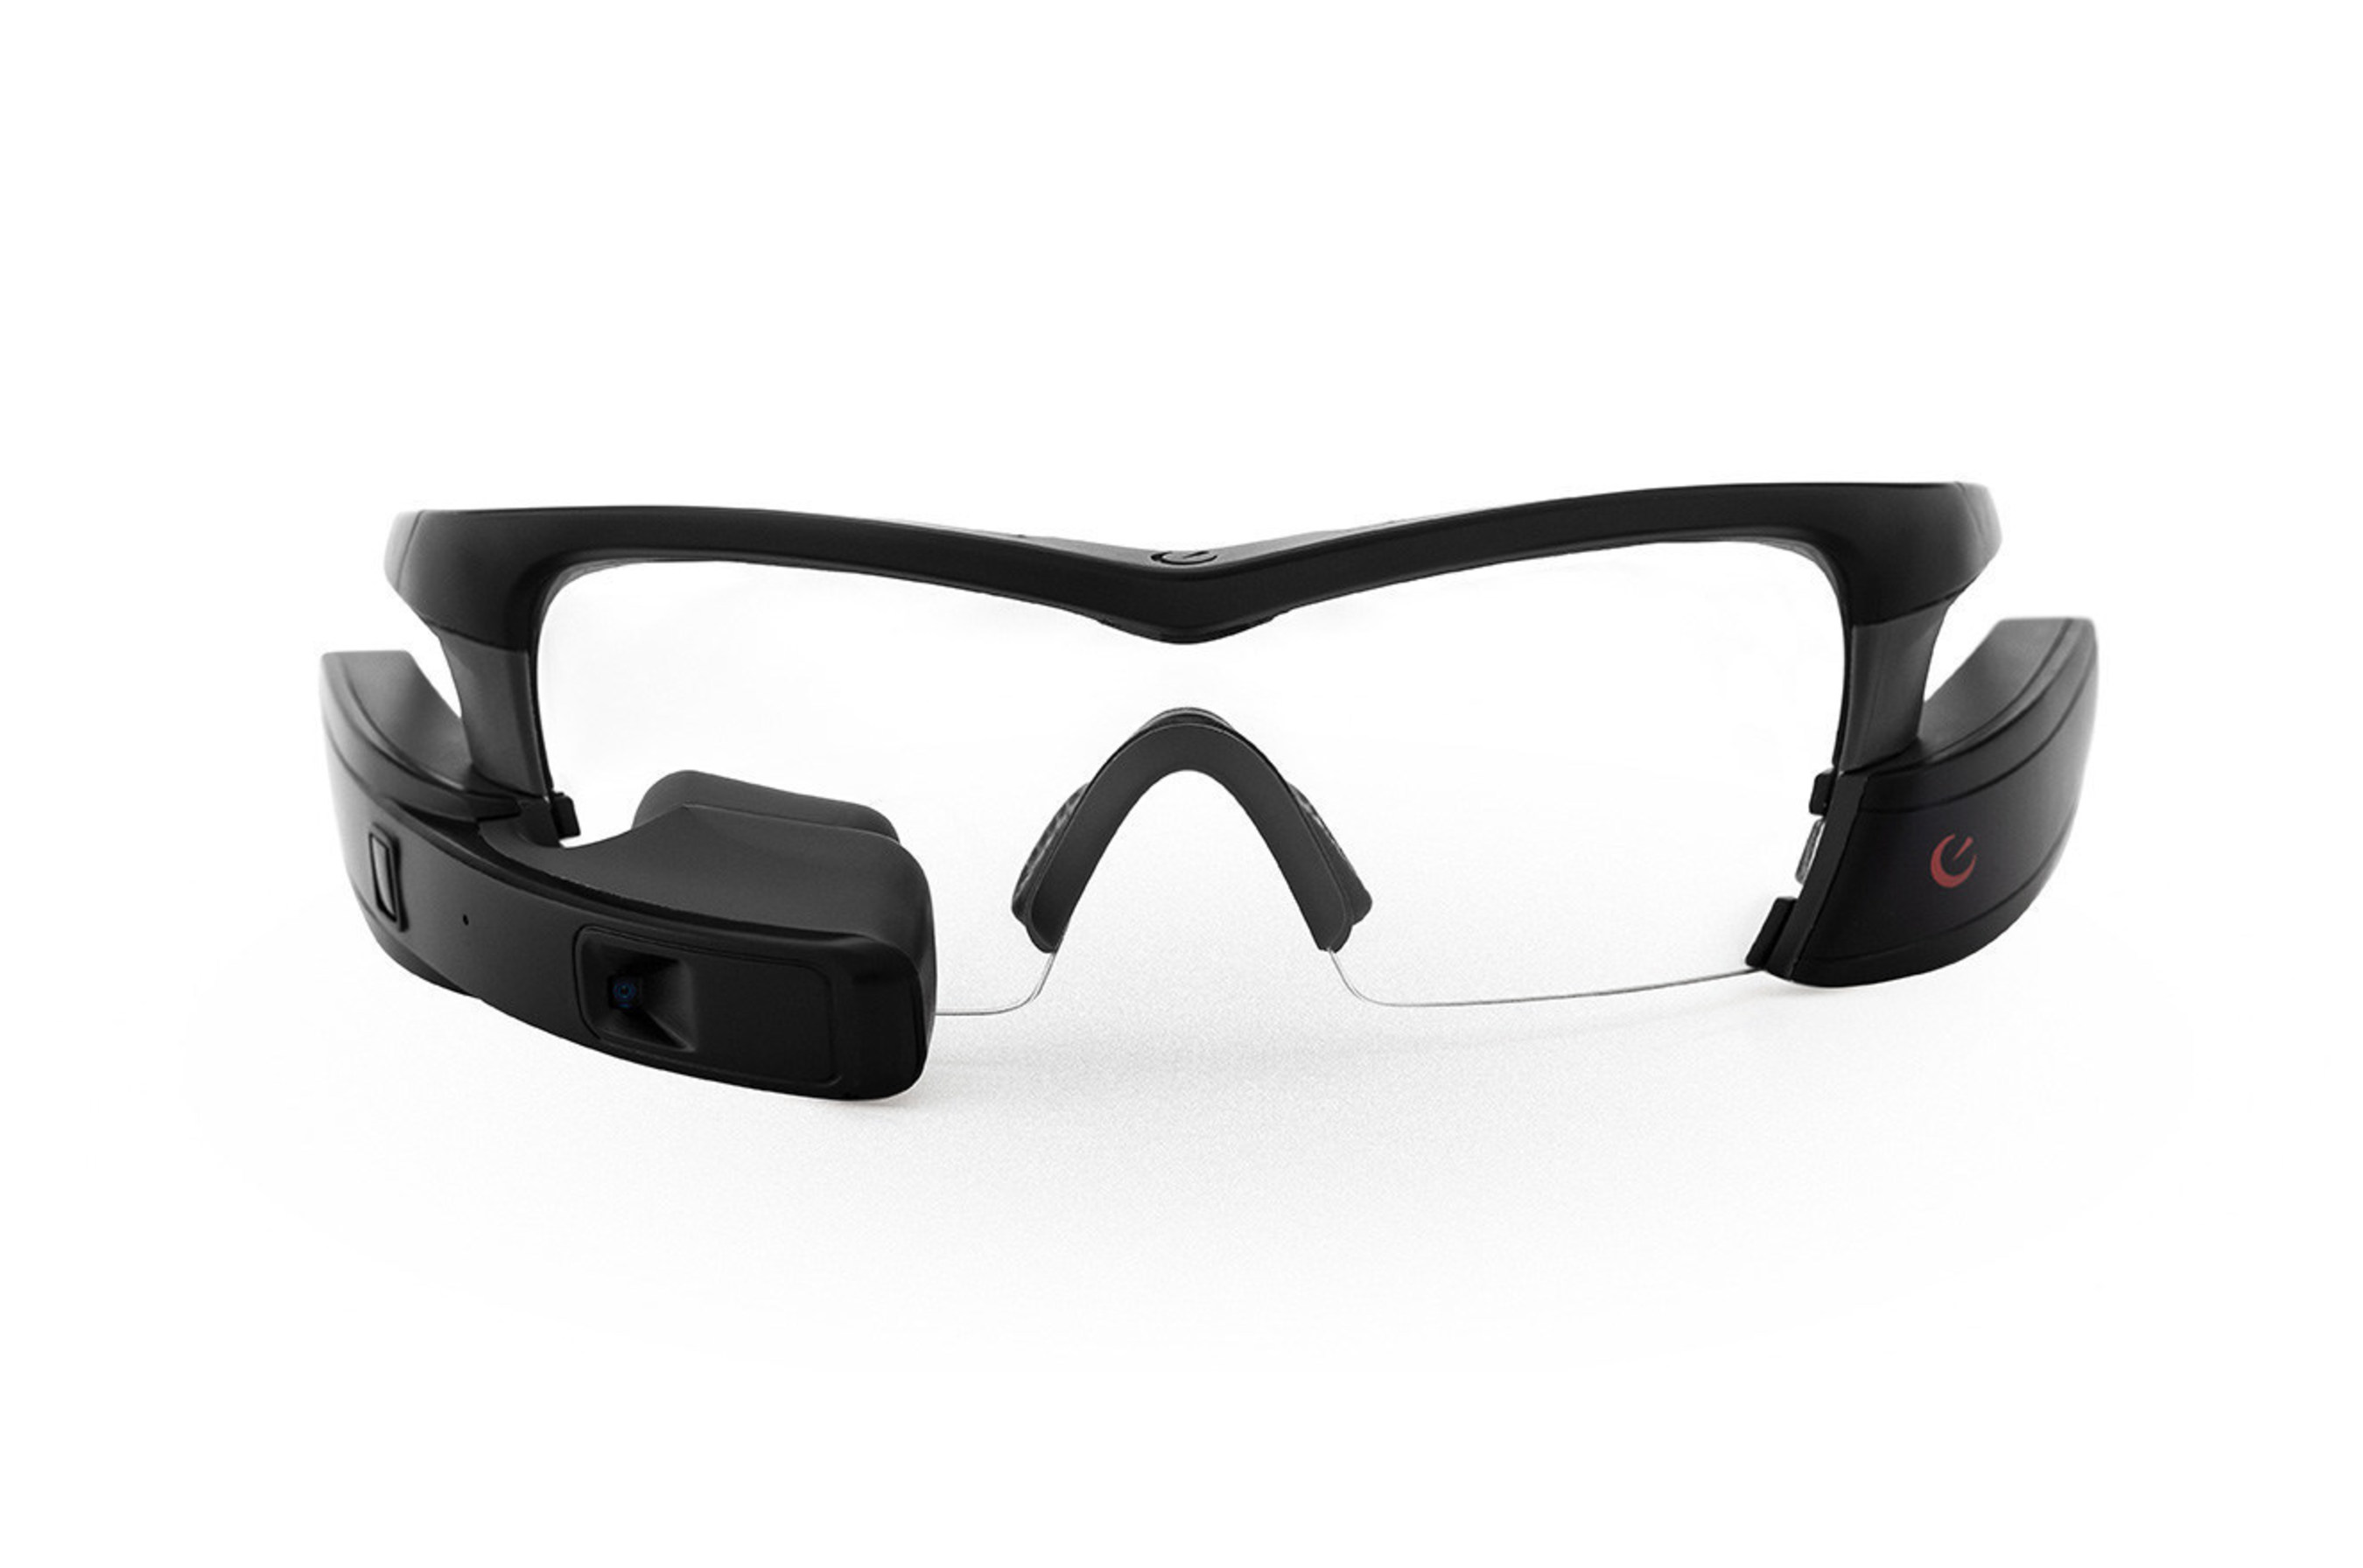 Recon Instruments, makers of Jet smart glass, have announced an integration with world's leading enterprise software company SAP. Jet eyewear will enable workers in industries like manufacturing, field service and oil & gas to communicate easily and to access critical data at a glance.